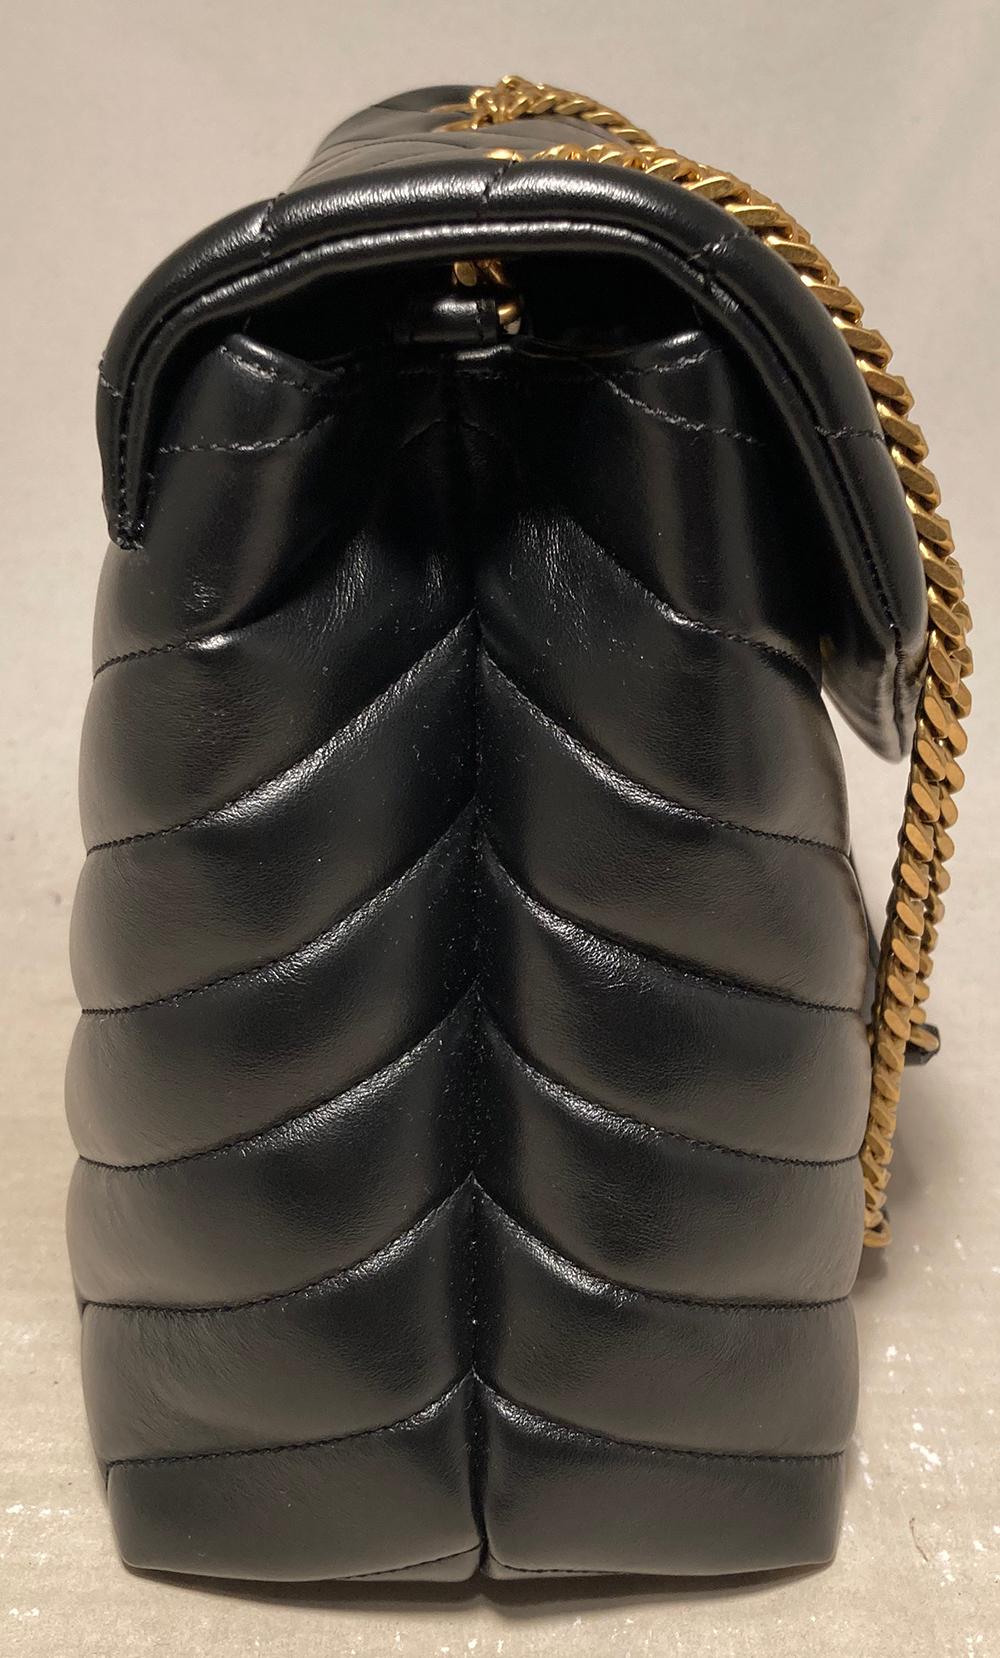 Saint Laurent Loulou Quilted Leather YSL Bag in New without tags condition. Black chevron quilted calfskin leather exterior trimmed with antiqued brass hardware. Front snap flap closure opens to a black satin lined interior with 2 storage